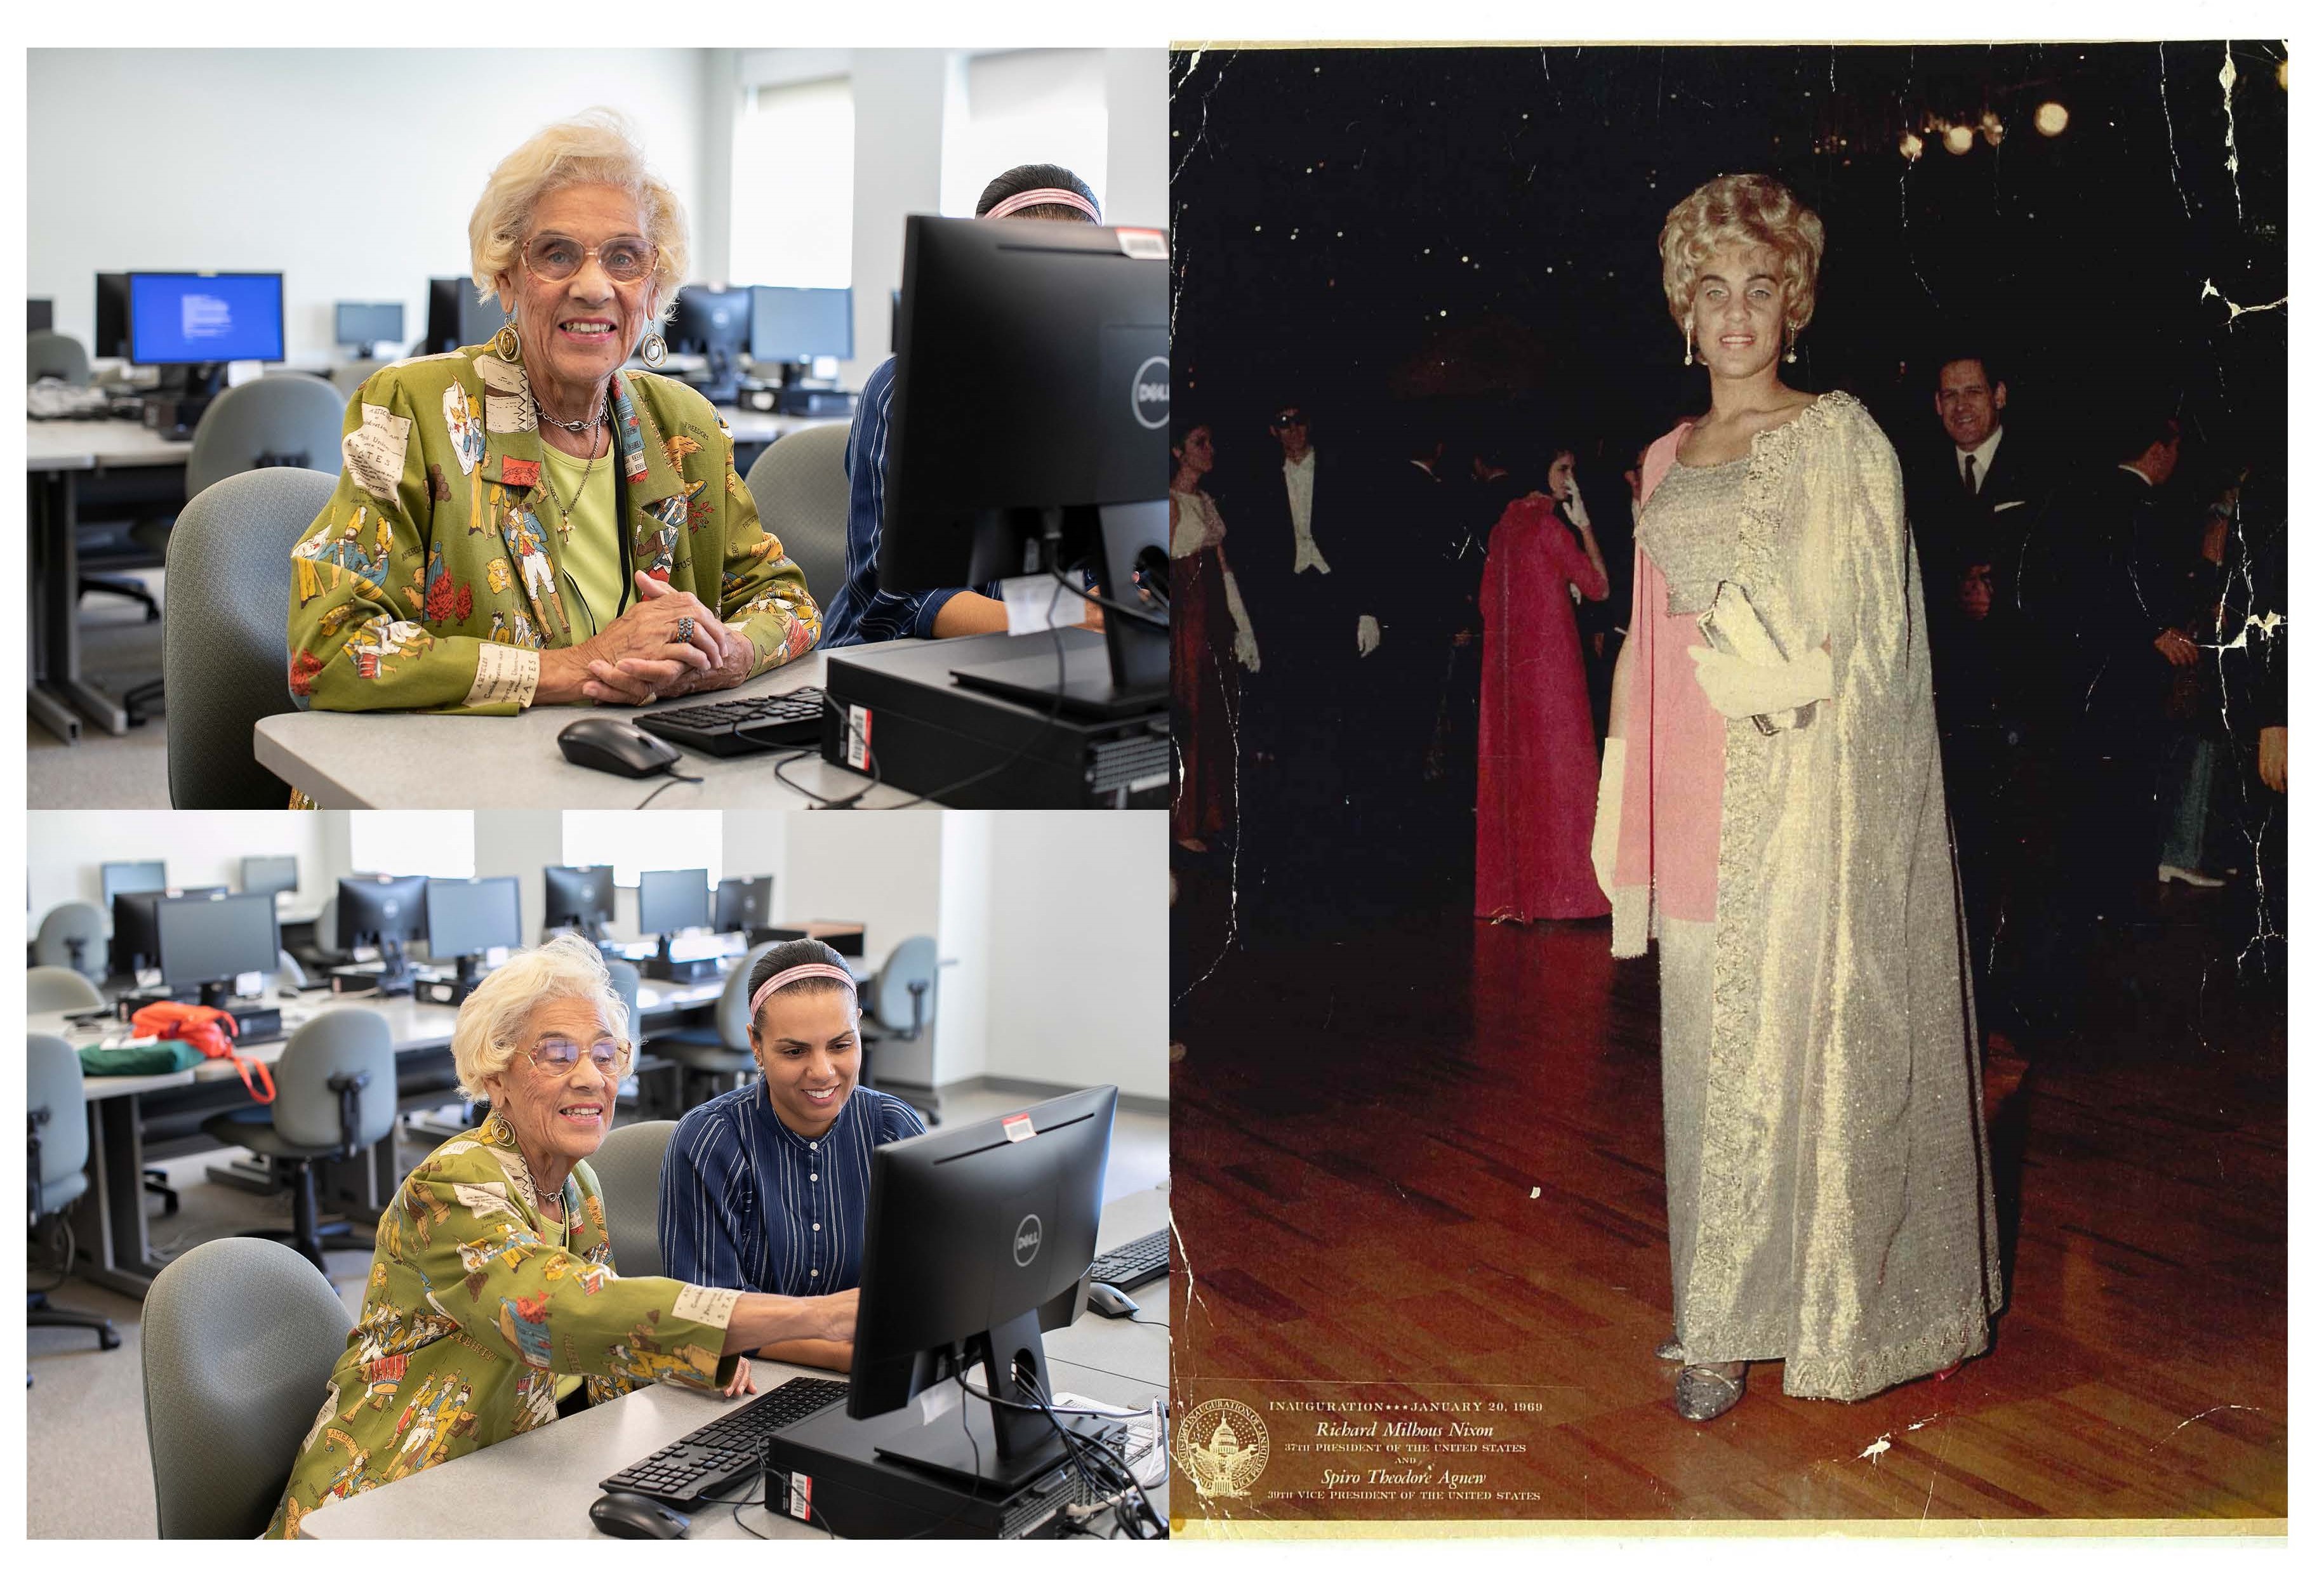 Alice Marsh in the computer lab and Alice Marsh at Nixon's inaugural ball